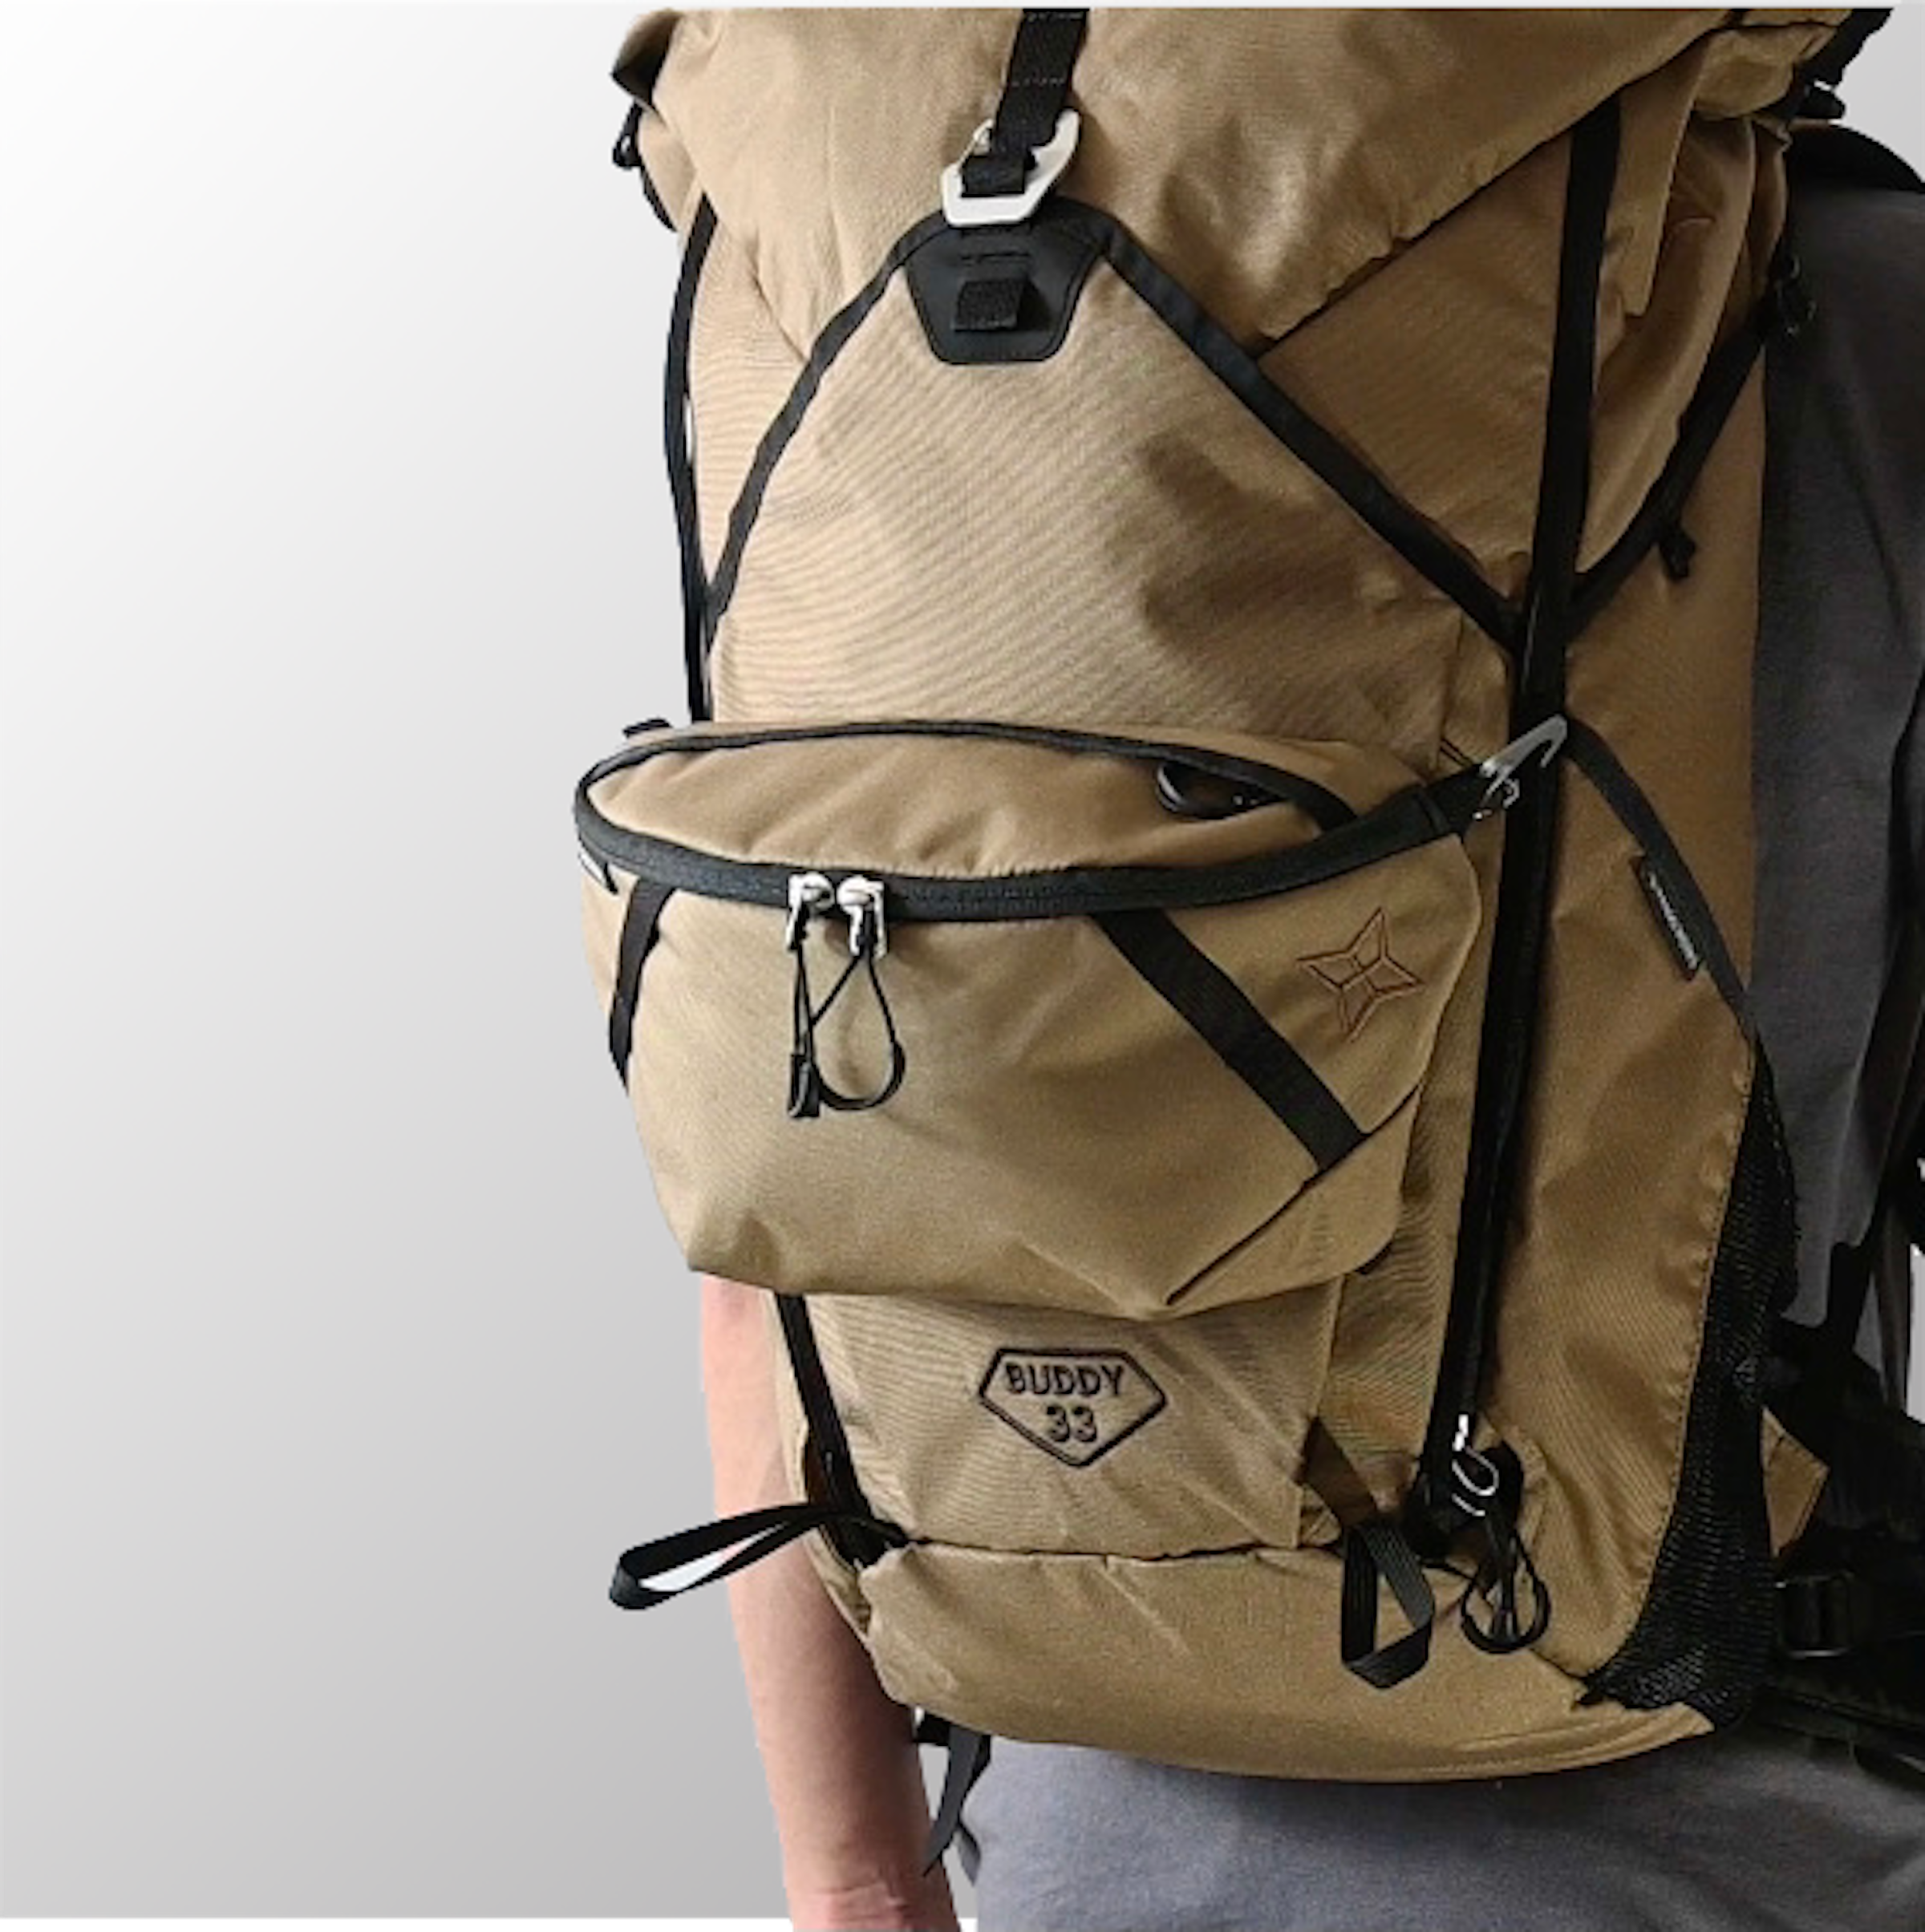 An example of attaching the 'Switch' to the front of a backpack with a hook and using it like a backpack pocket. It can be attached to many brands of backpacks. The backpack in the photo is the 'Buddy 33' from 'PAAGOWORKS'.